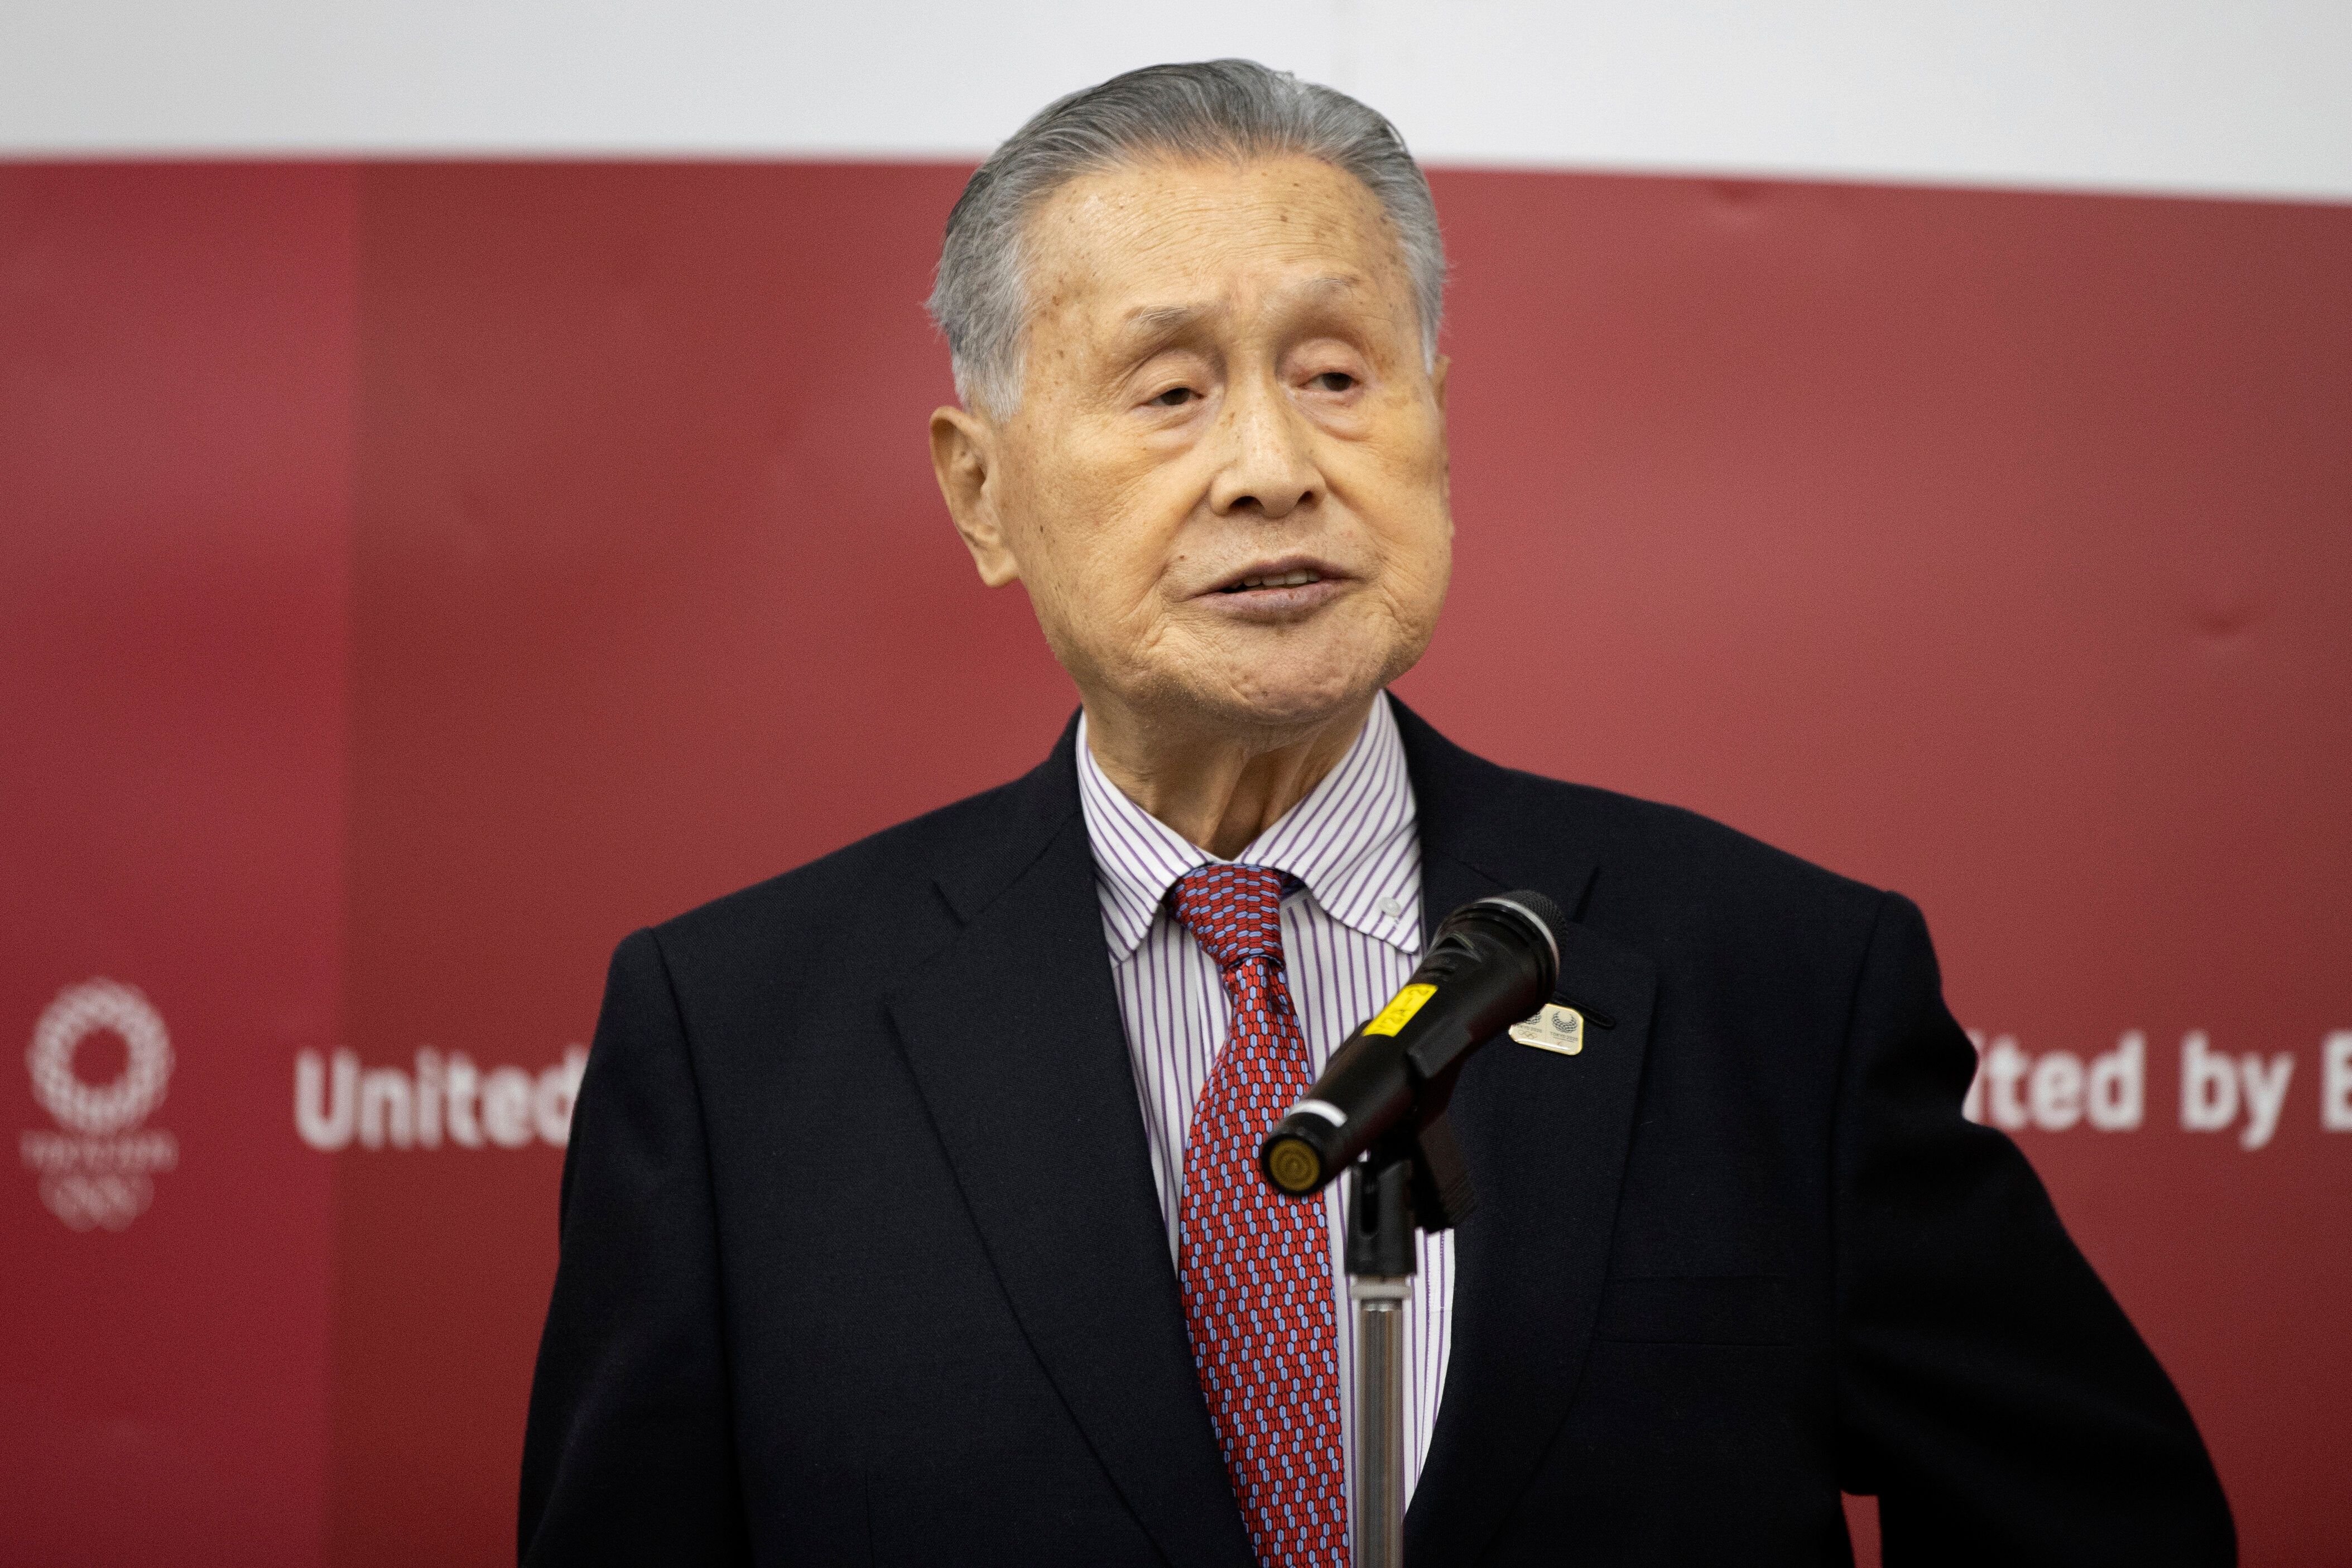 Yoshiro Mori, the president of the Tokyo Olympic organizing committee, said he would not resign despite pressure on him to do